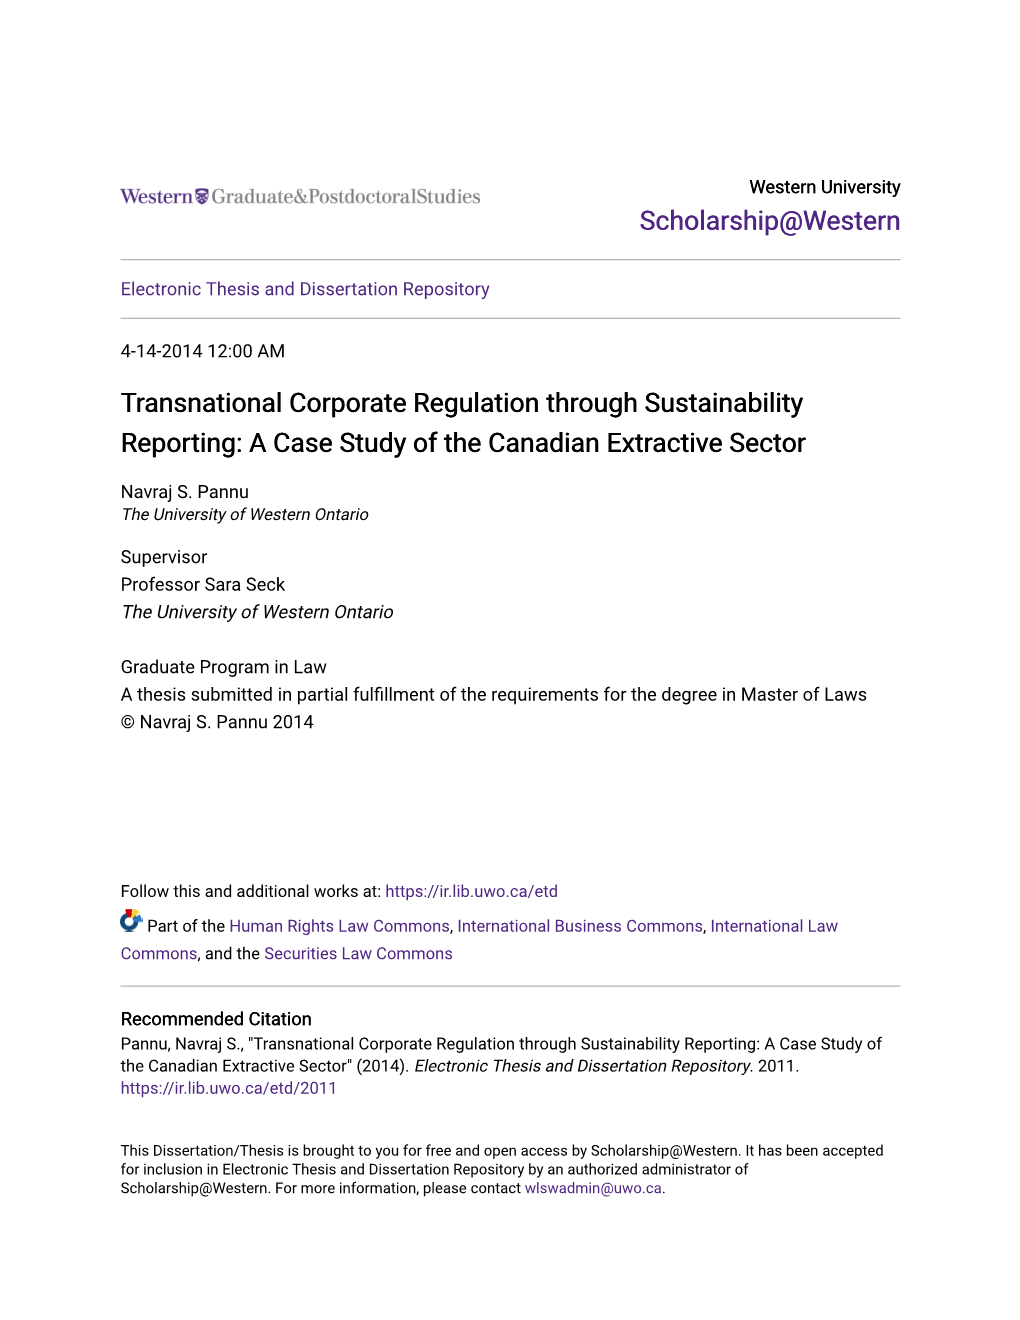 Transnational Corporate Regulation Through Sustainability Reporting: a Case Study of the Canadian Extractive Sector